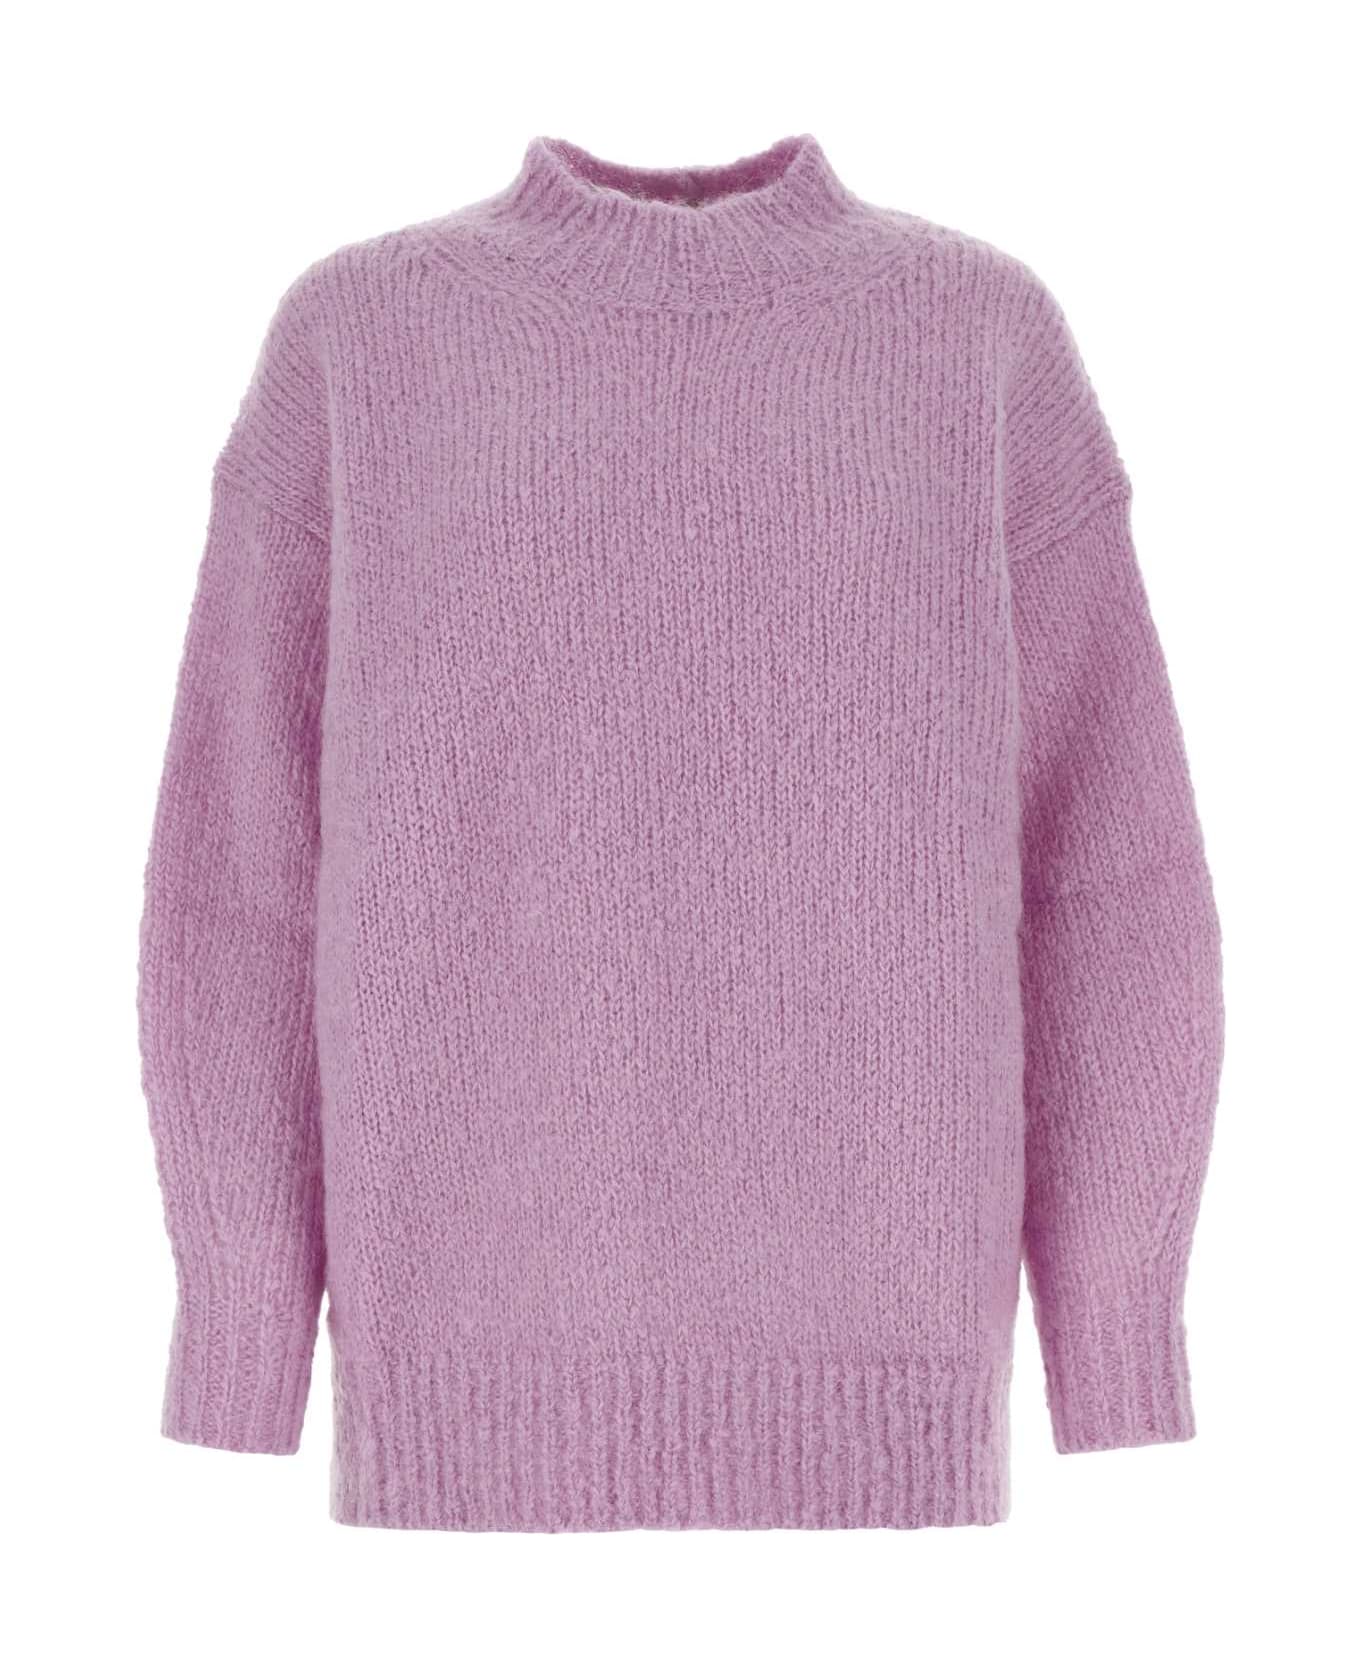 Isabel Marant Lilac Mohair Blend Idol Oversize Sweater - LILAC